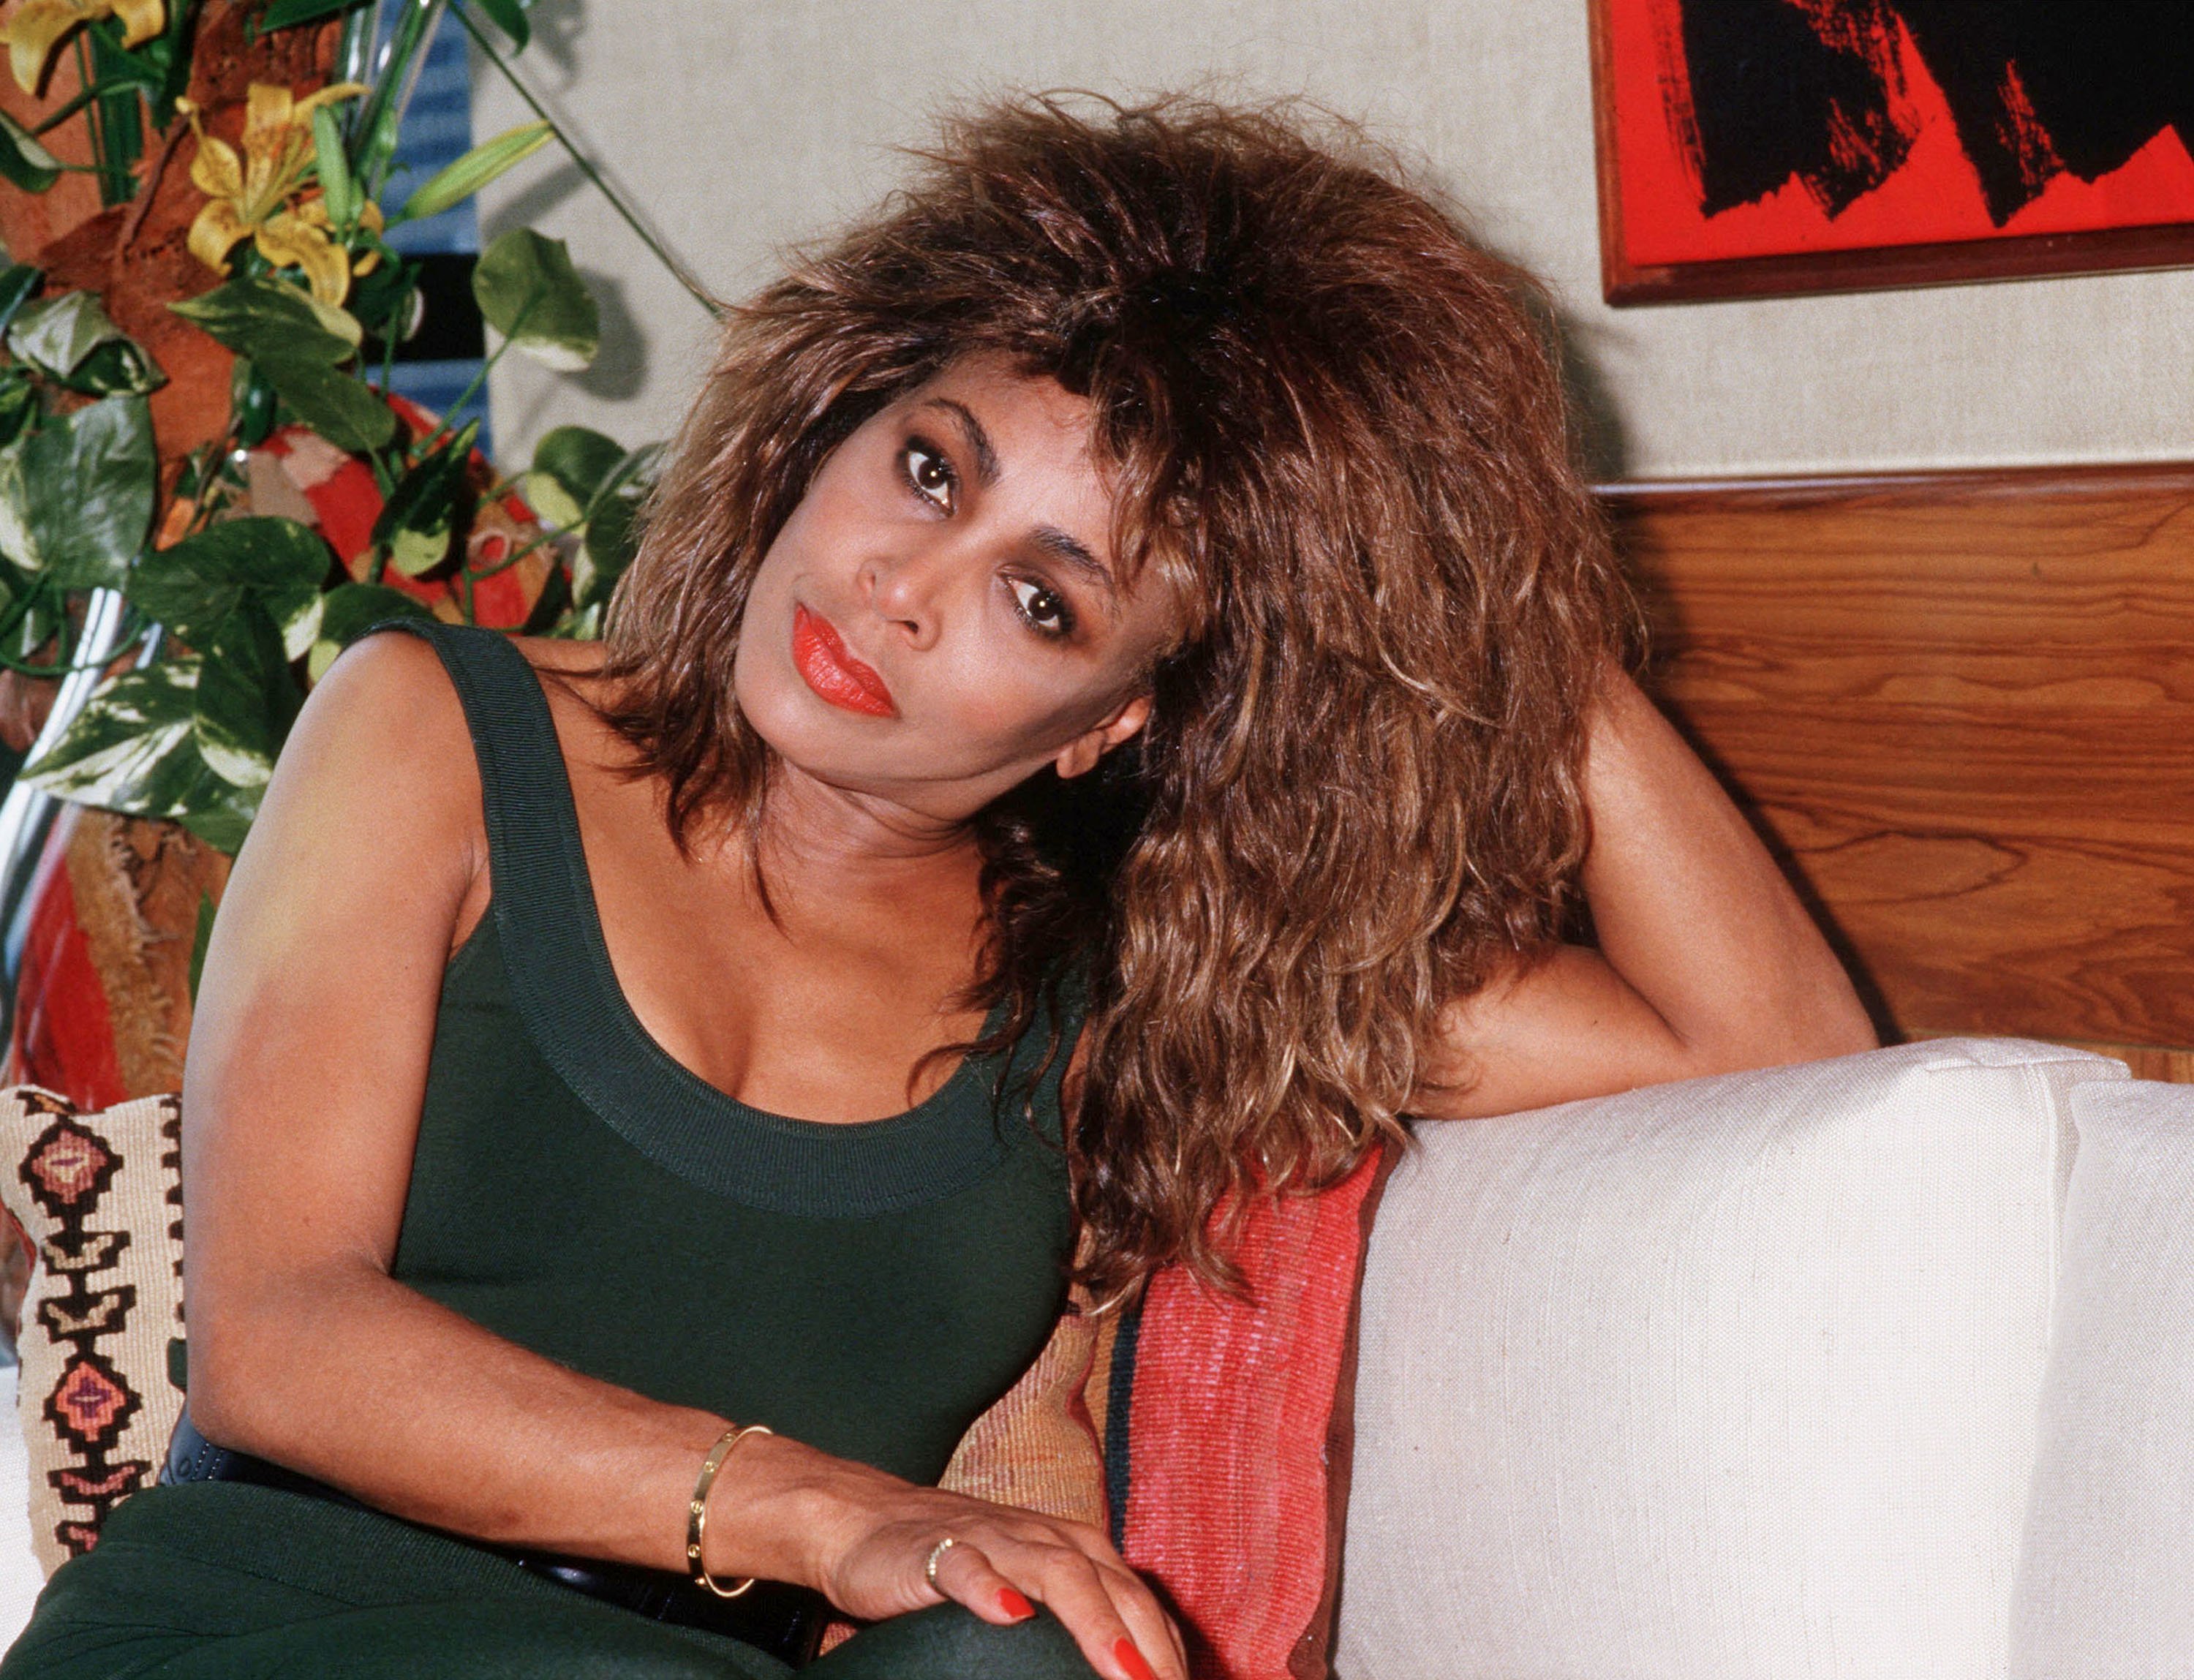 Tina Turner in Rio de Janeiro, Brazil in 1988. | Source: Getty Images.